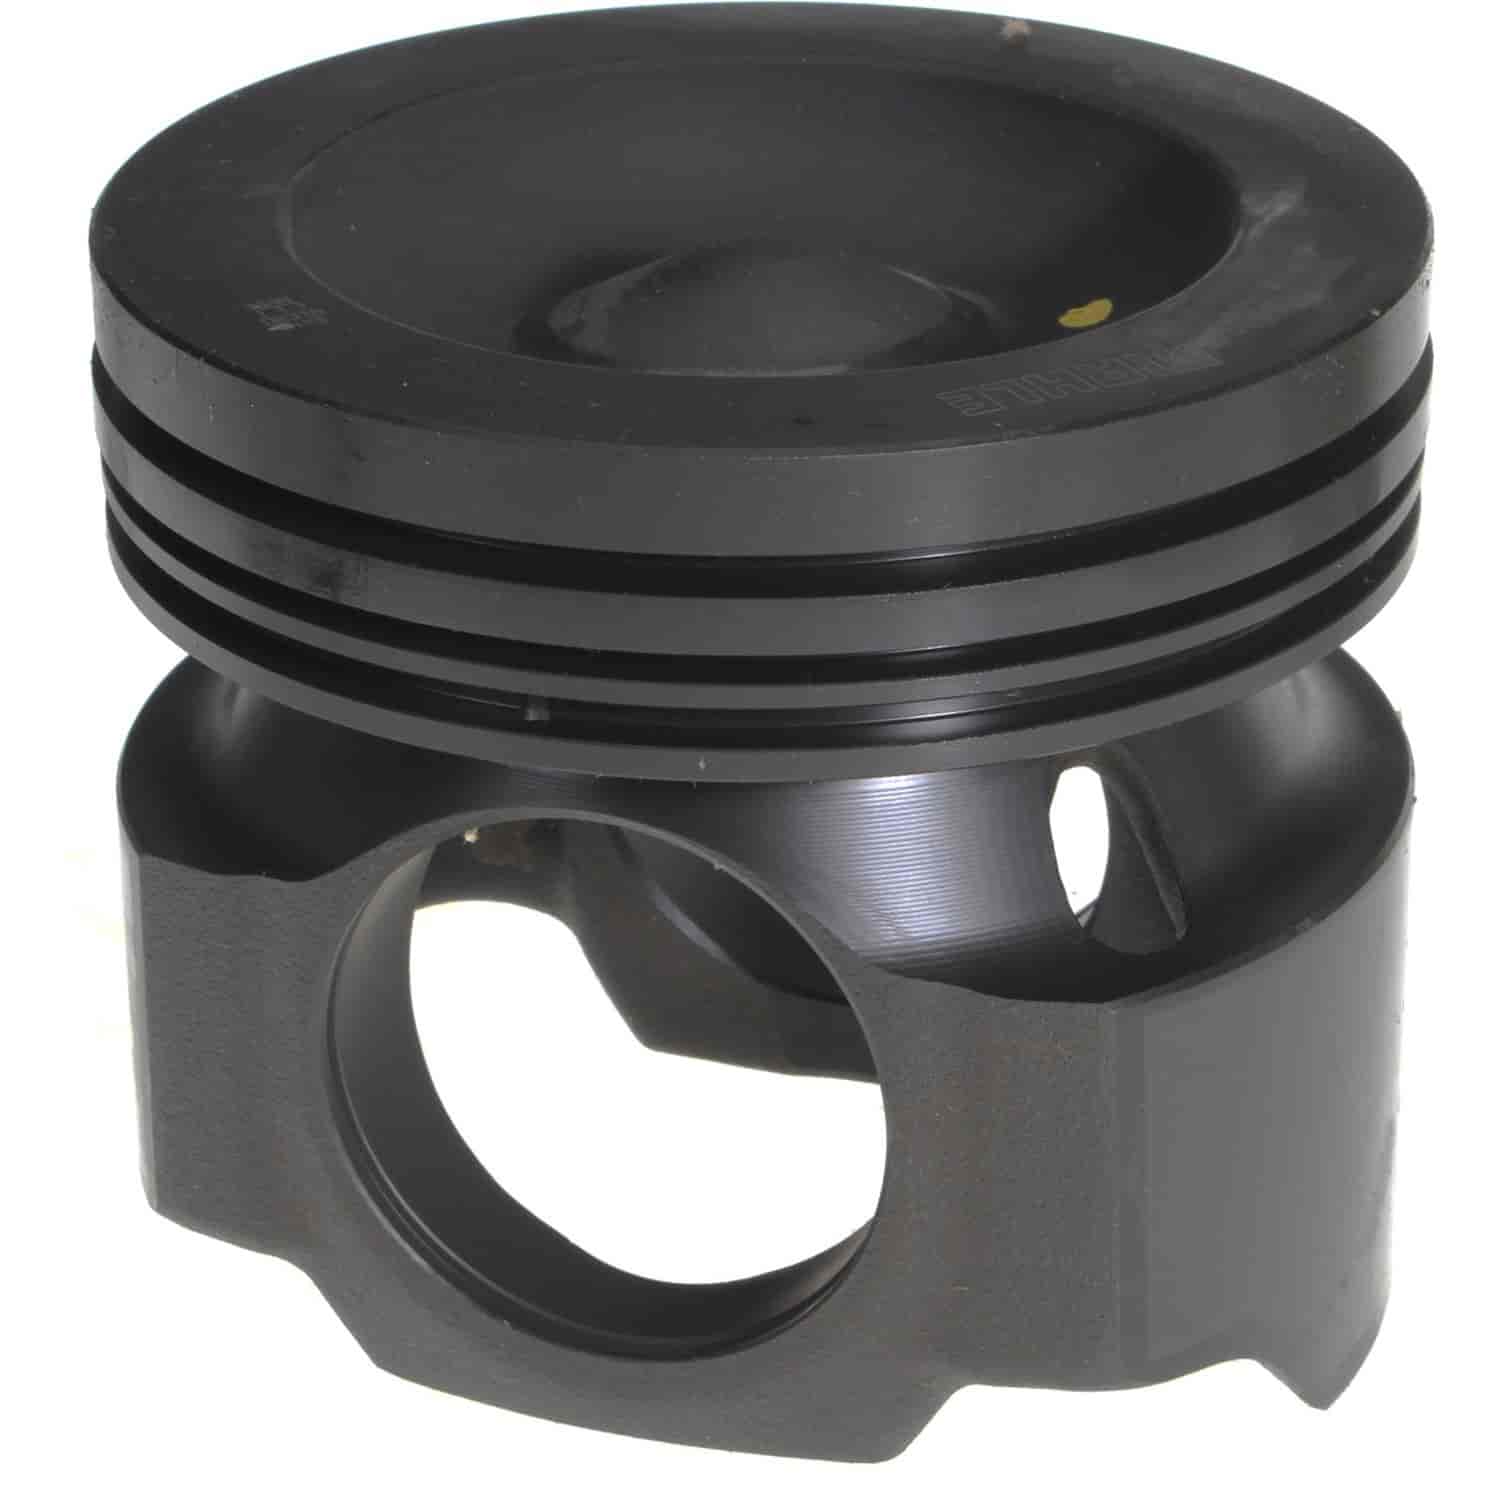 Cylinder Sleeve Assembly Cat. 137mm/5.400 Bore C15 with OE#3067460 18.0 1 CR Monotherm without